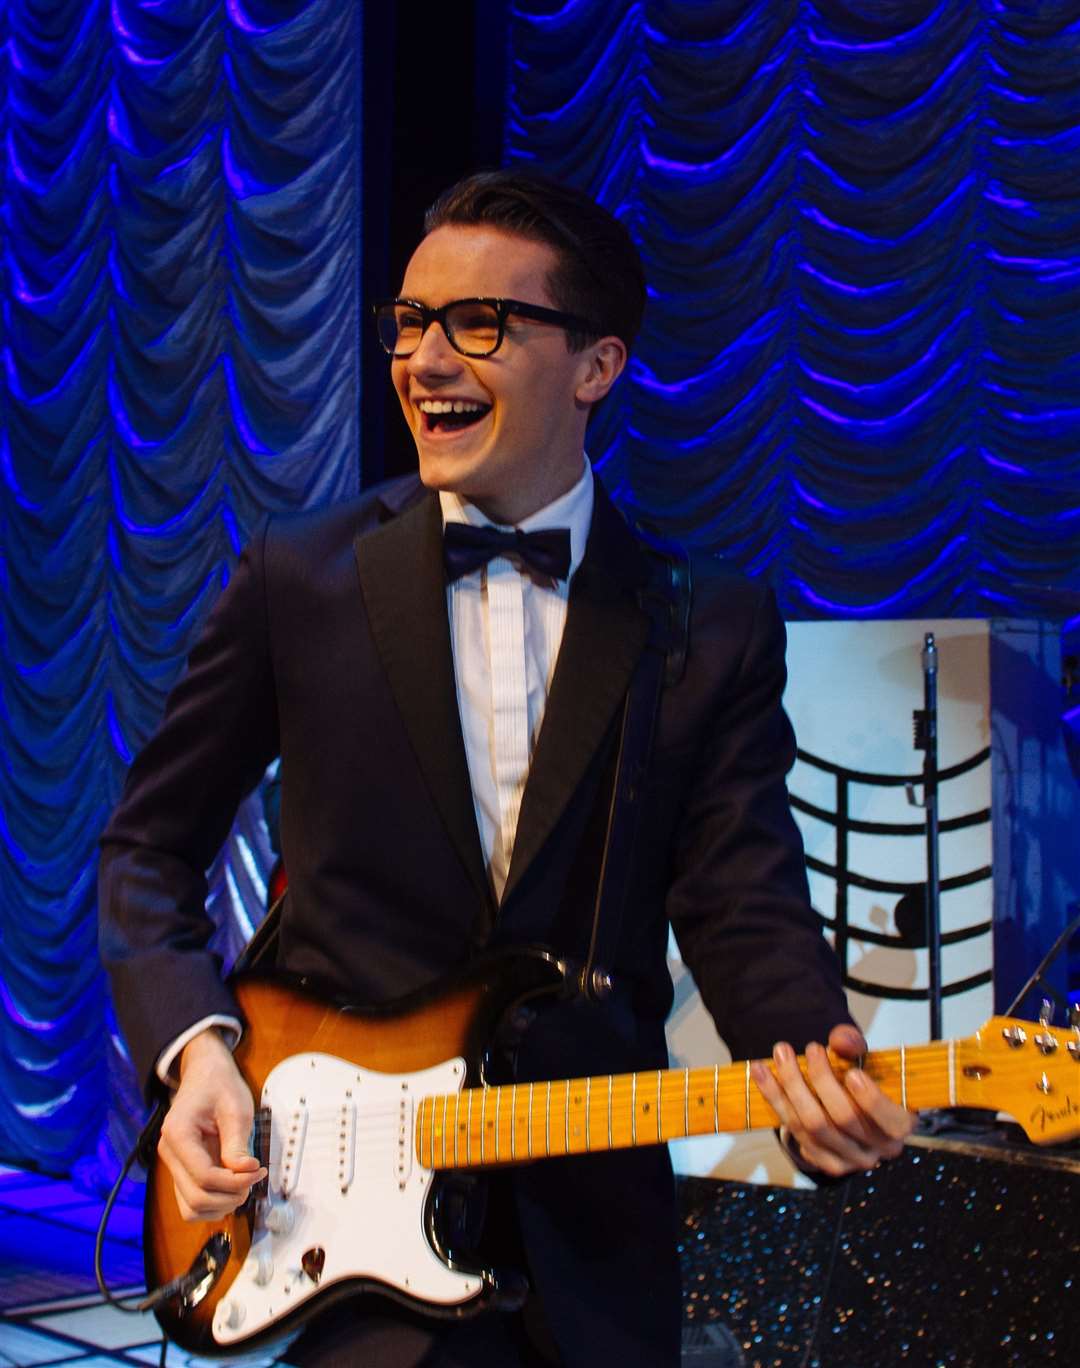 Buddy Holly brought to life in the show at Eden Court till Saturday. Picture: PAUL J.NEED